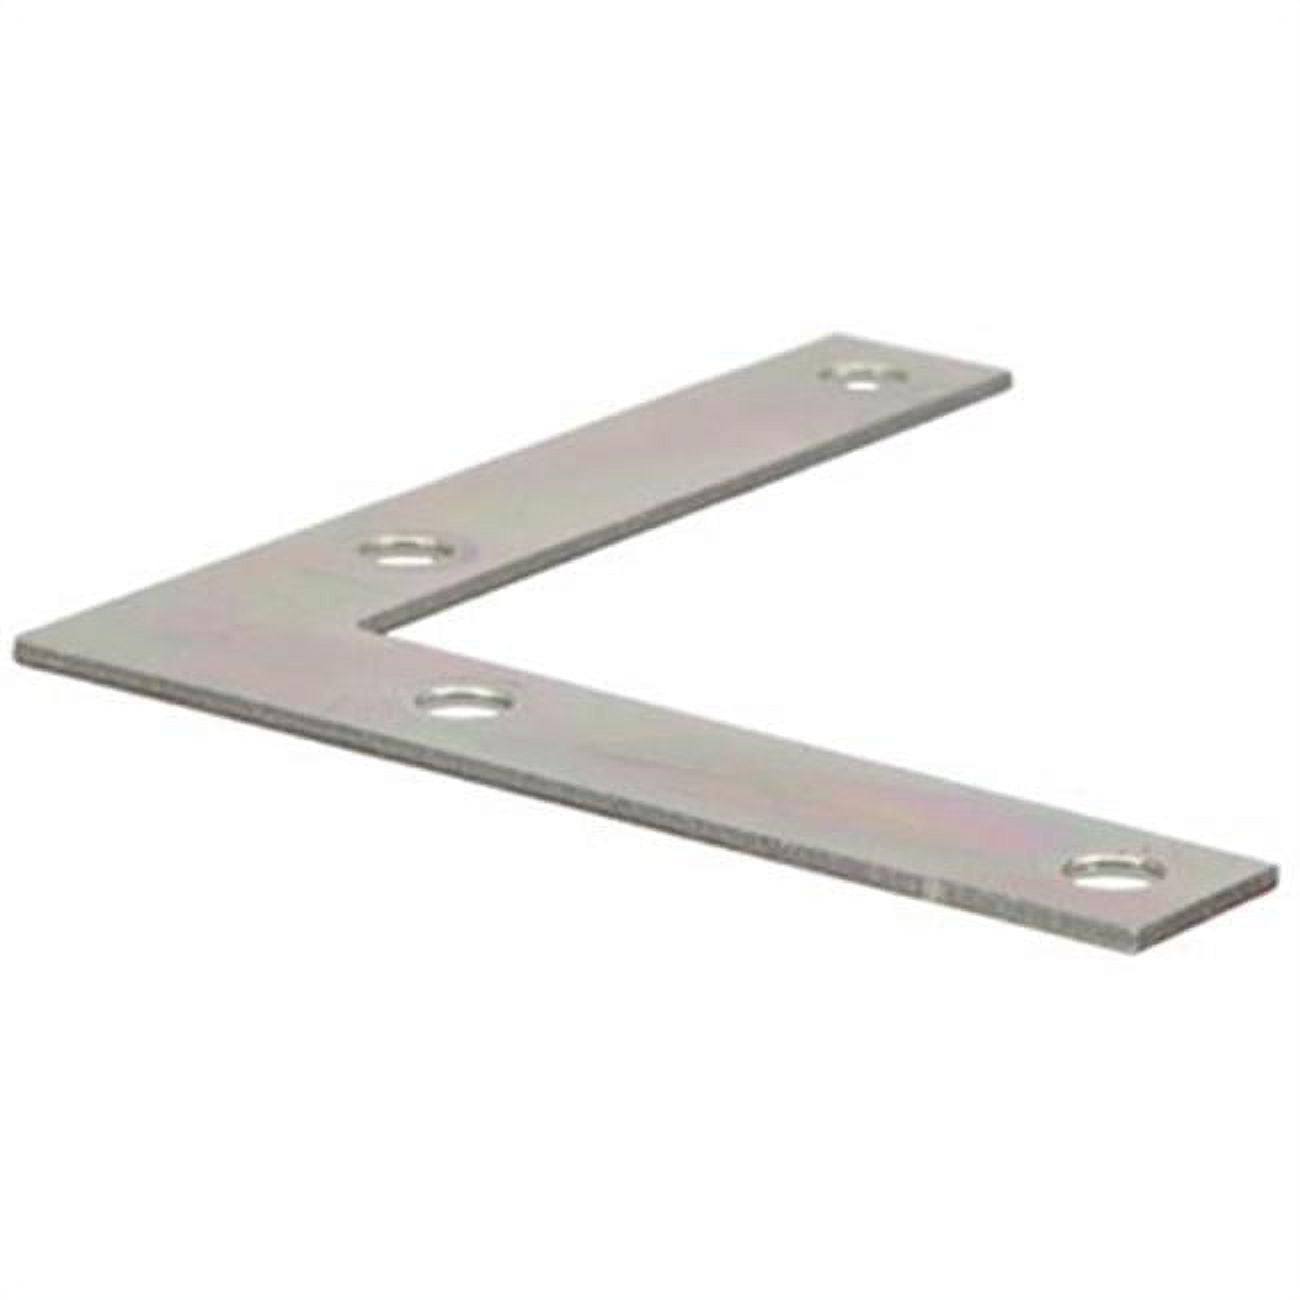 UPC 008236862447 product image for 851104 6 x 1 in. Zinc Plated Flat Corner Iron, Pack of 5 | upcitemdb.com